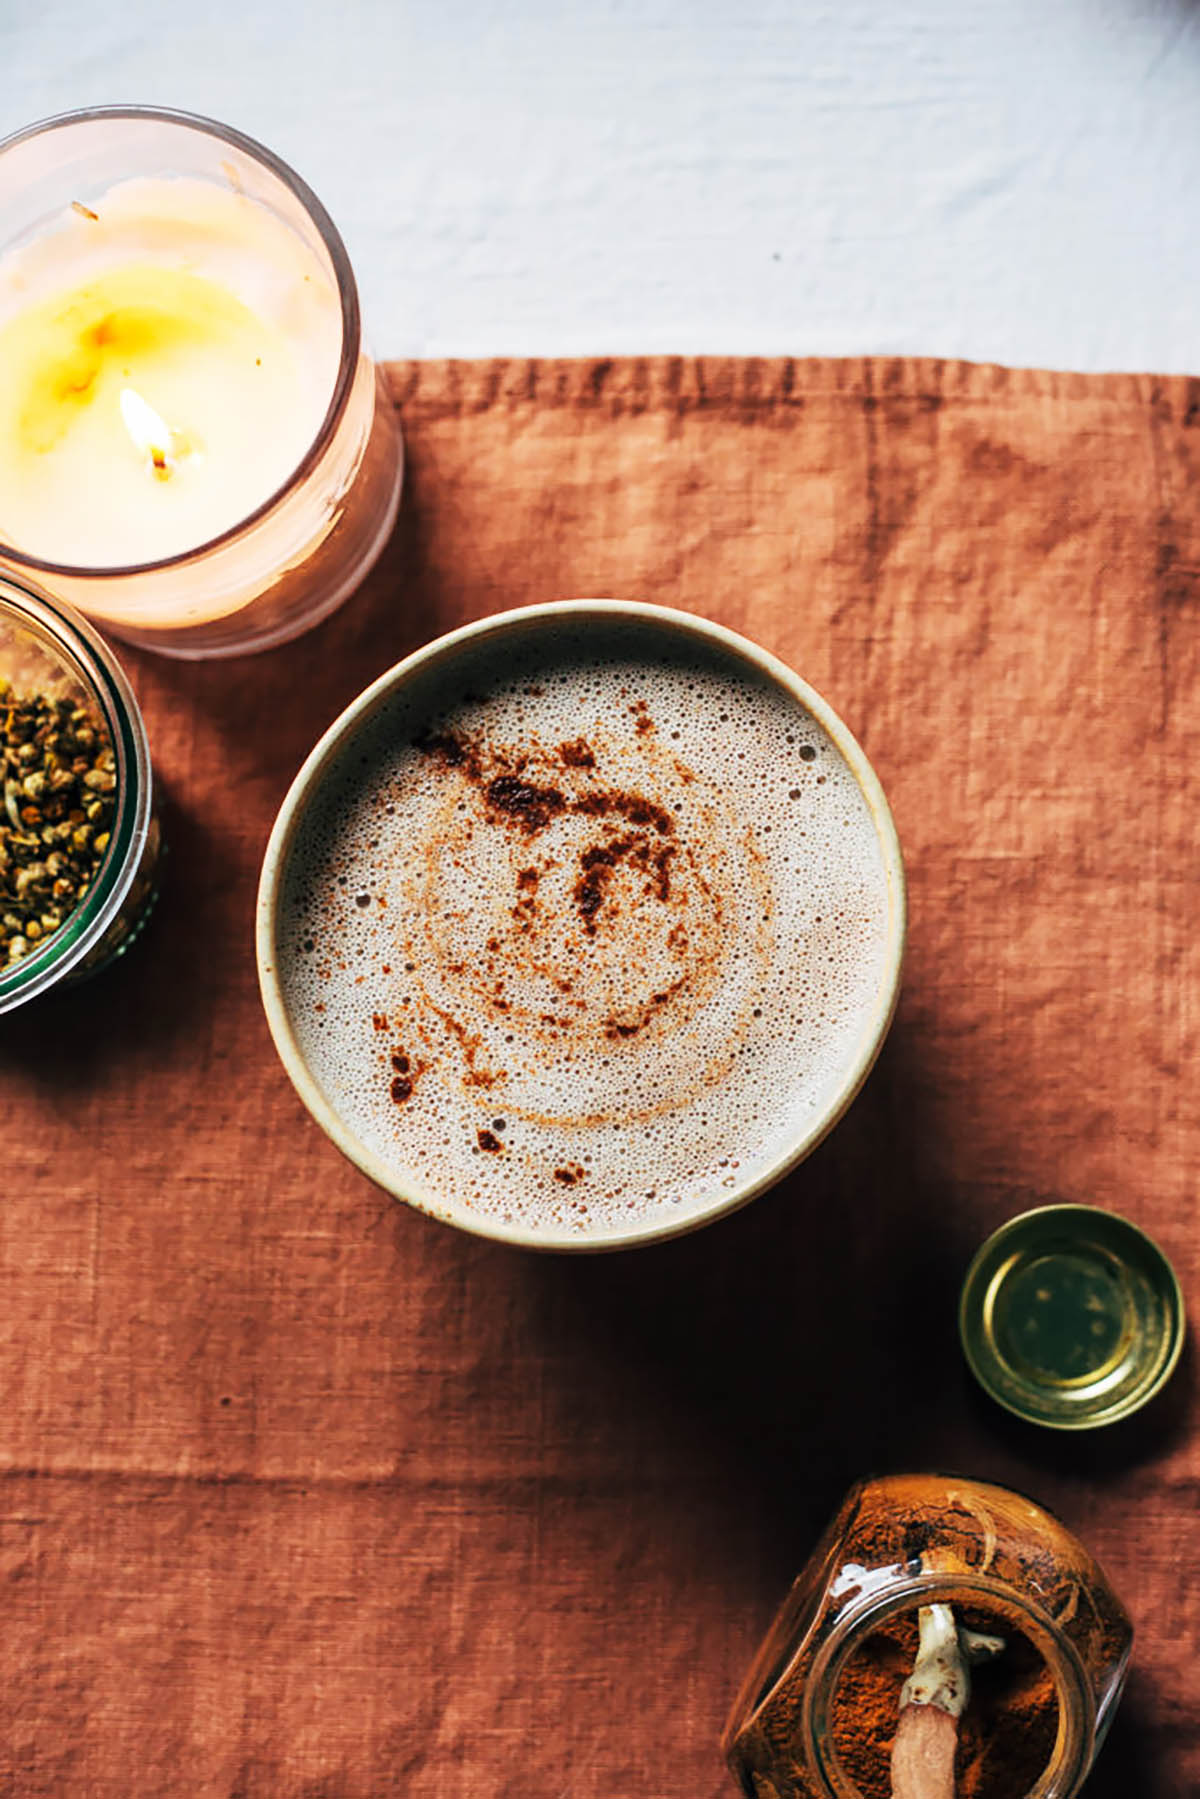 A foamy drink topped with cinnamon with spices around.